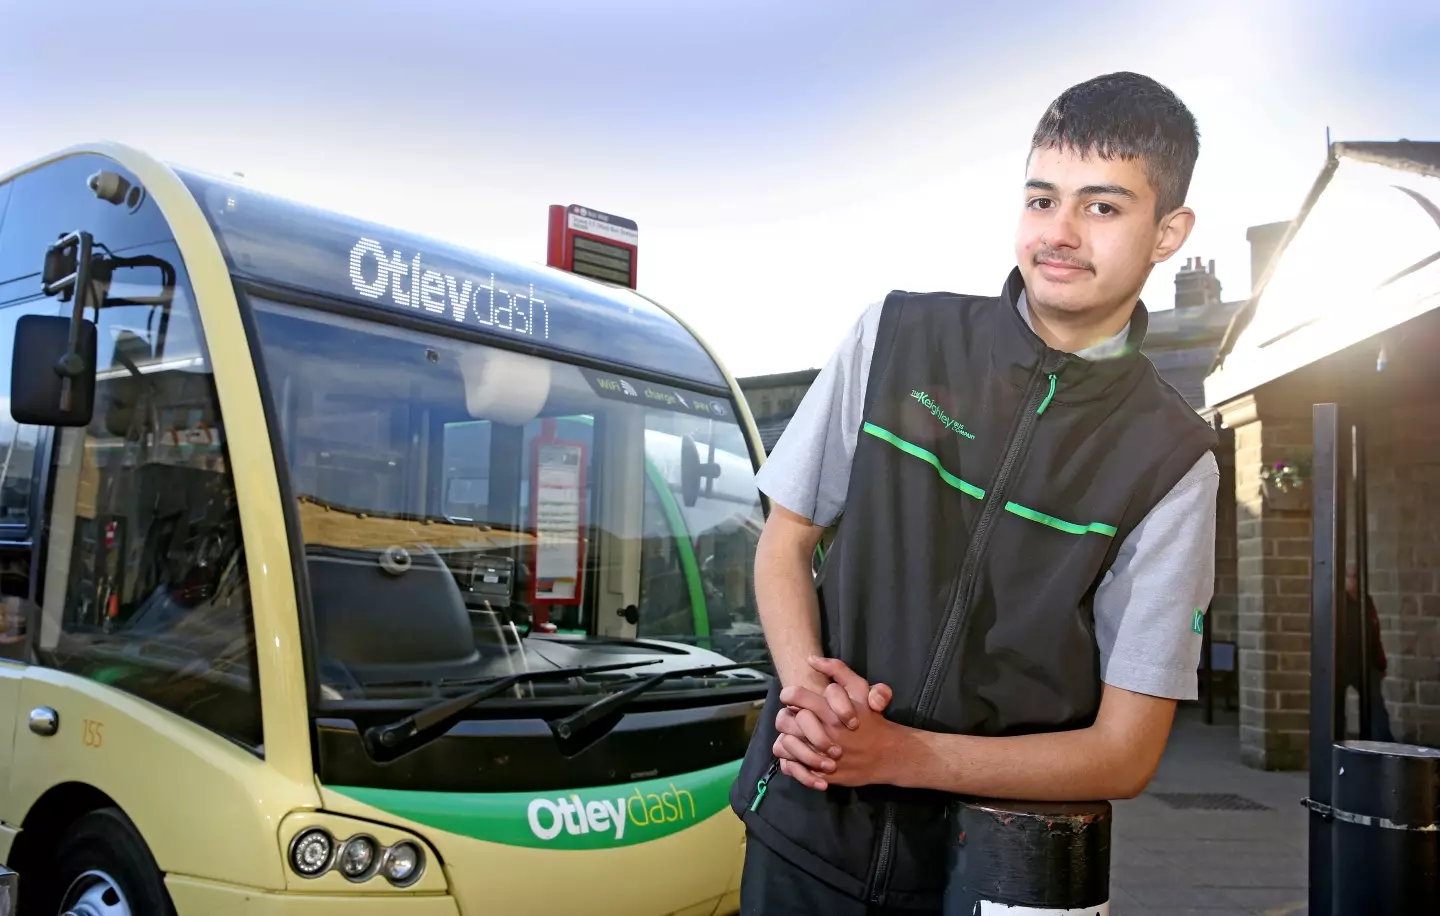 Kraish has become the UK's youngest bus driver.